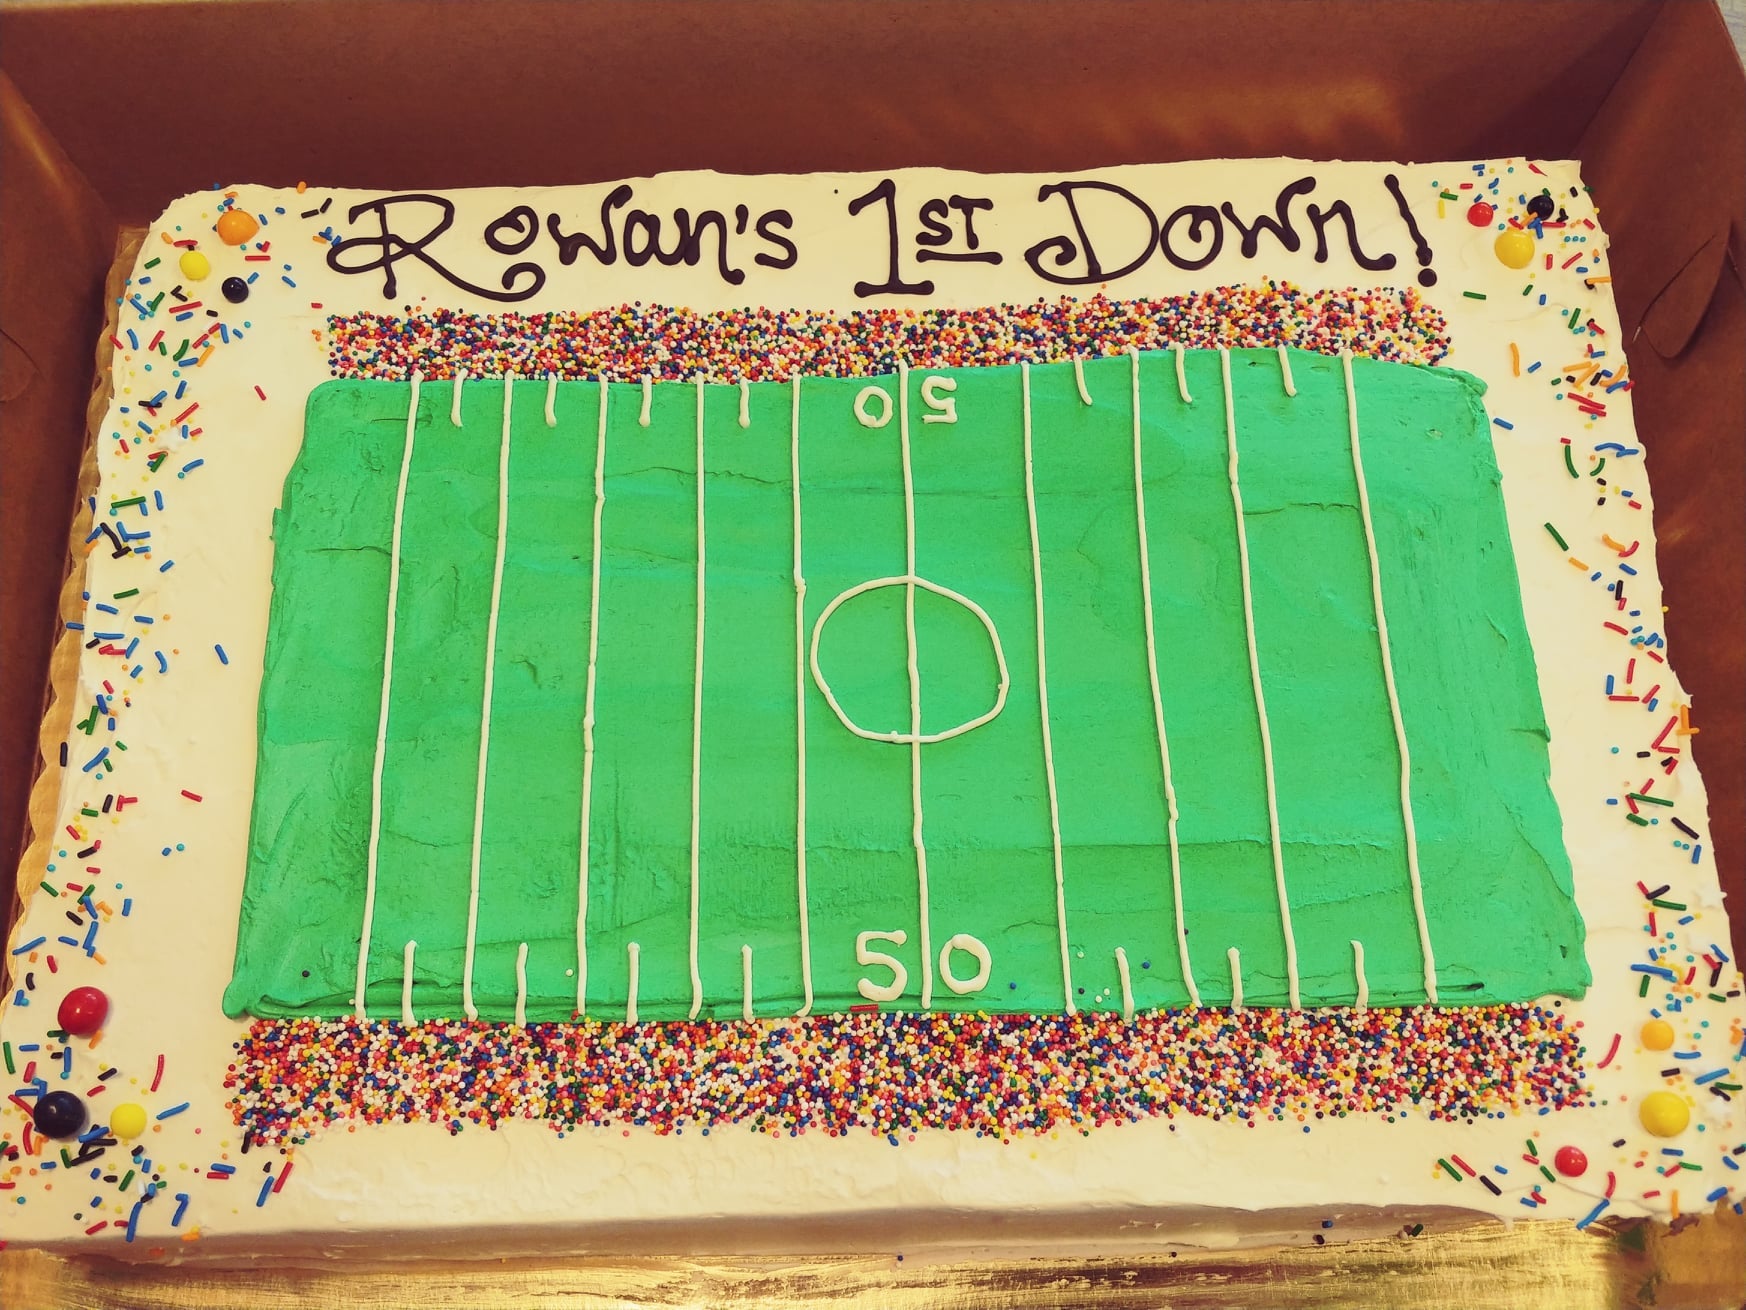 Football themed birthday cake for baby, toddler, child, adult. Sheet cake, delicous.